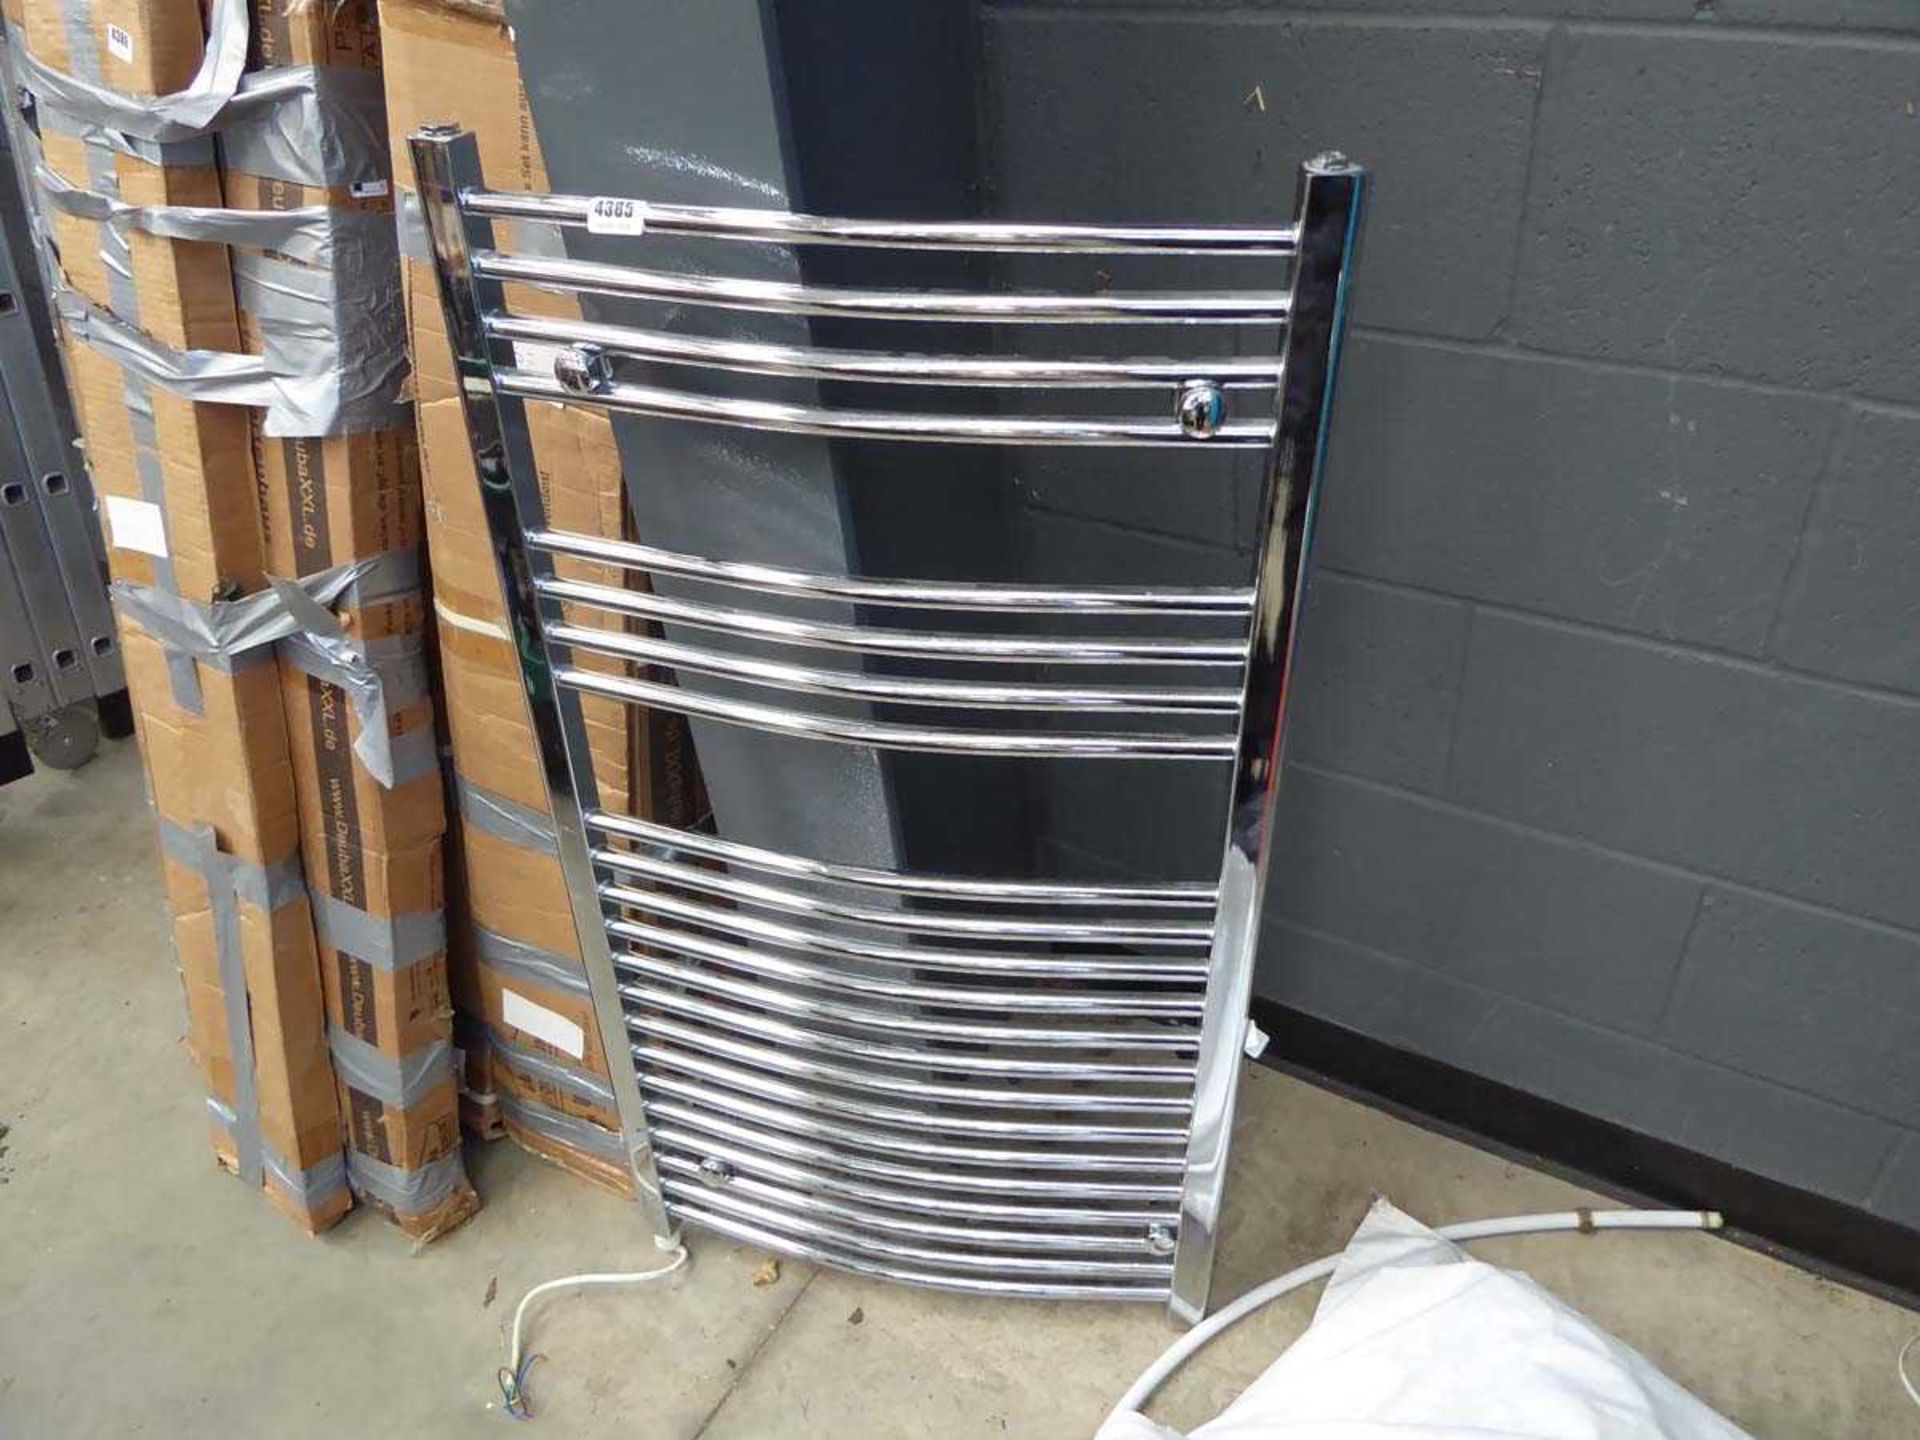 Electric chrome towel radiator and shower valve in sack